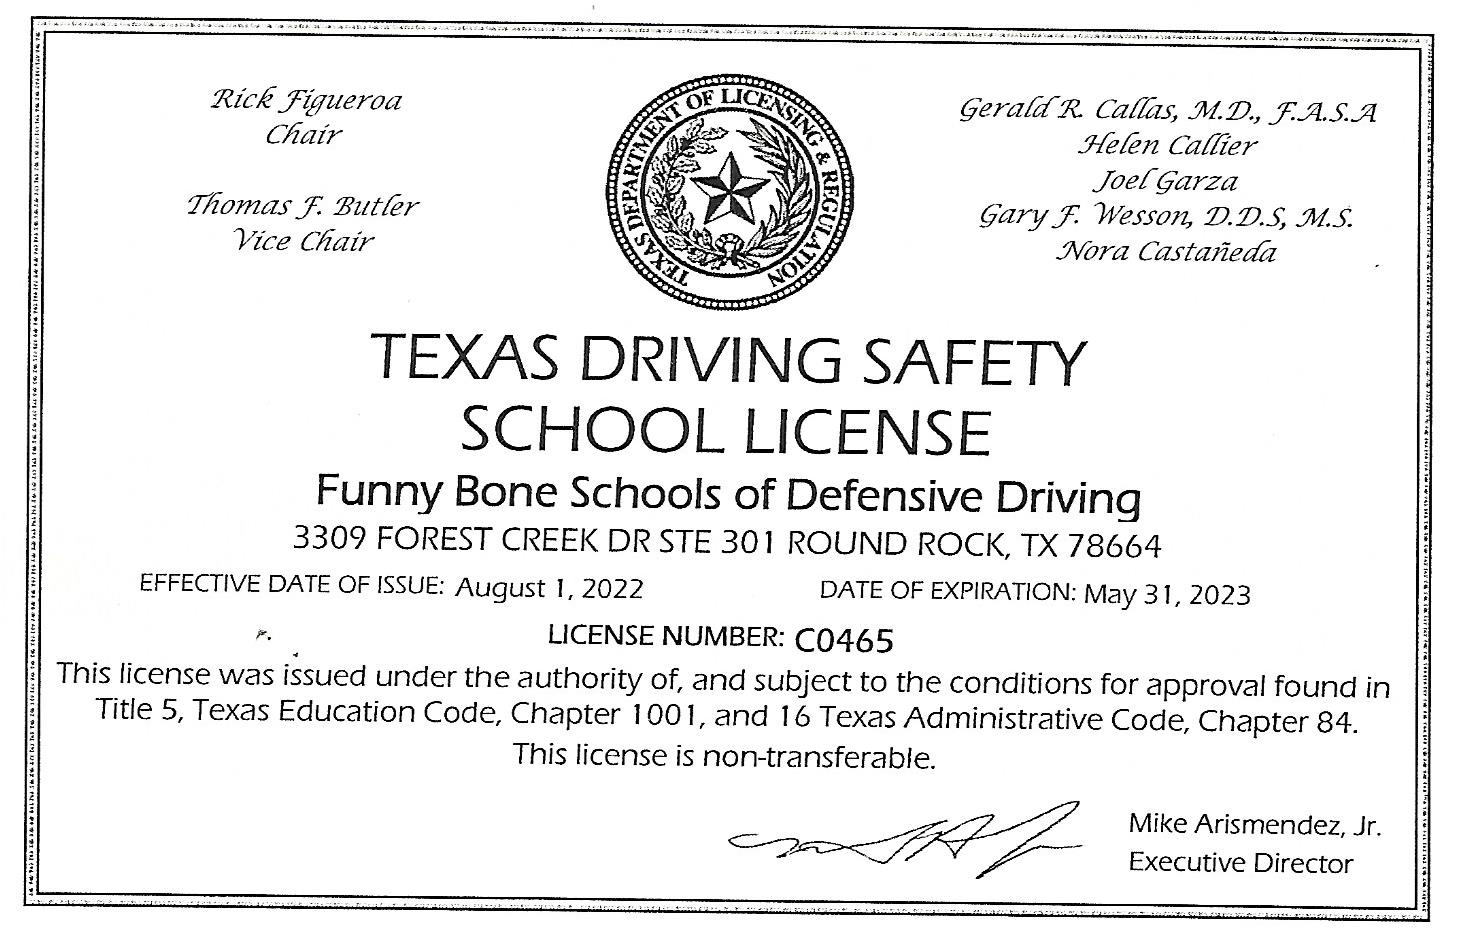 Funny Bone Statewide License 2022-23